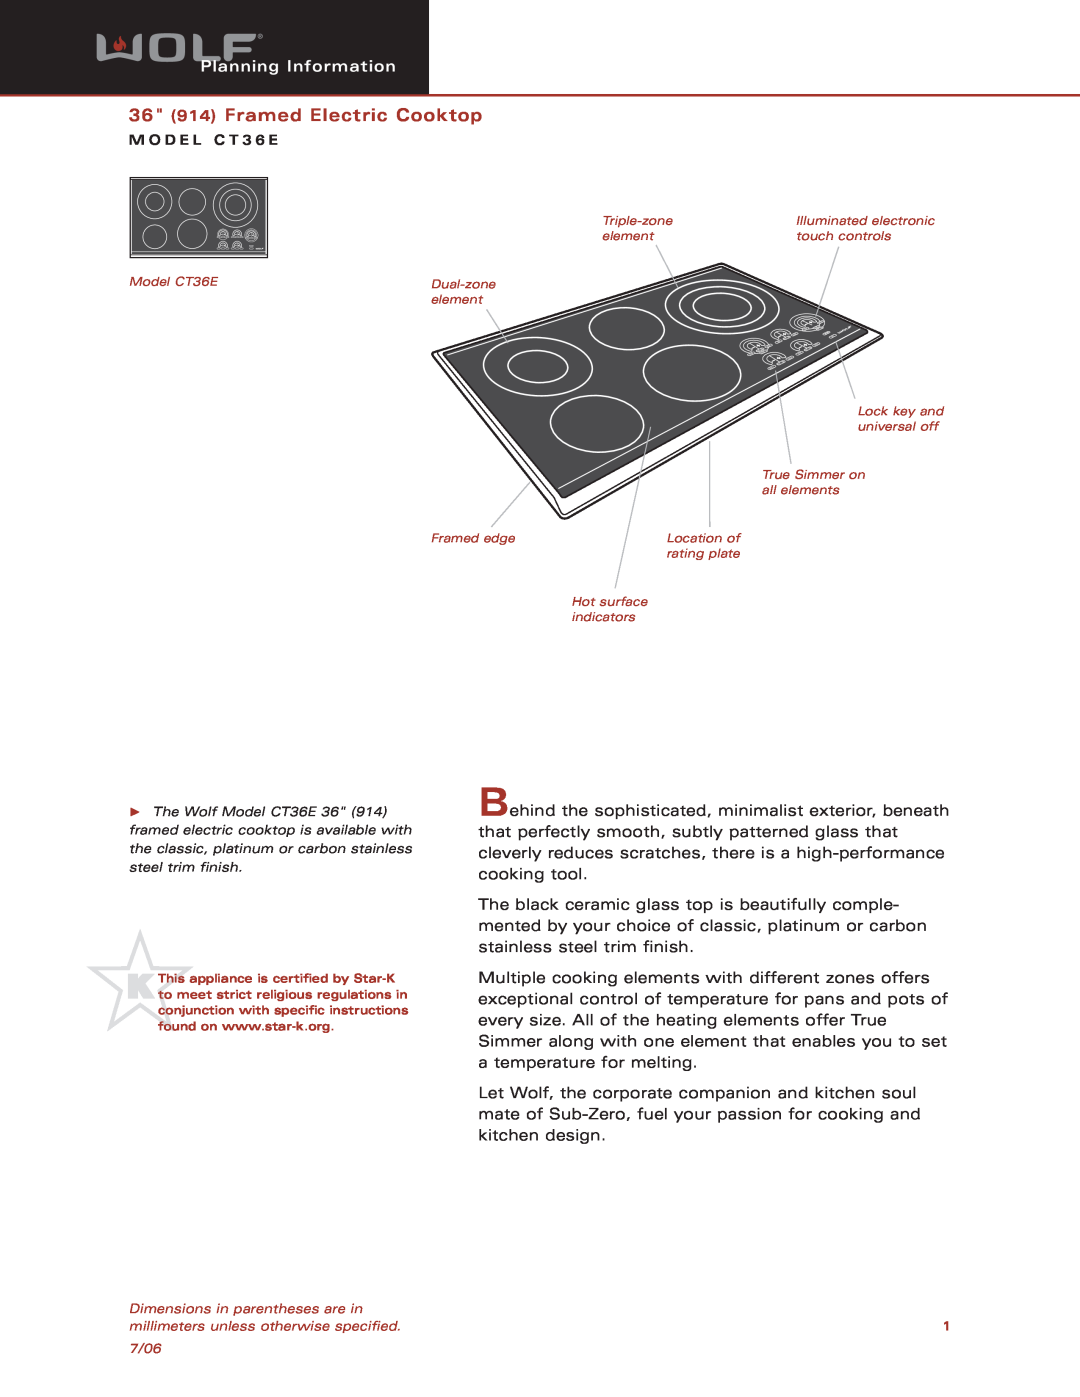 Sub-Zero CT36E dimensions 36 914 Framed Electric Cooktop, Planning Information 